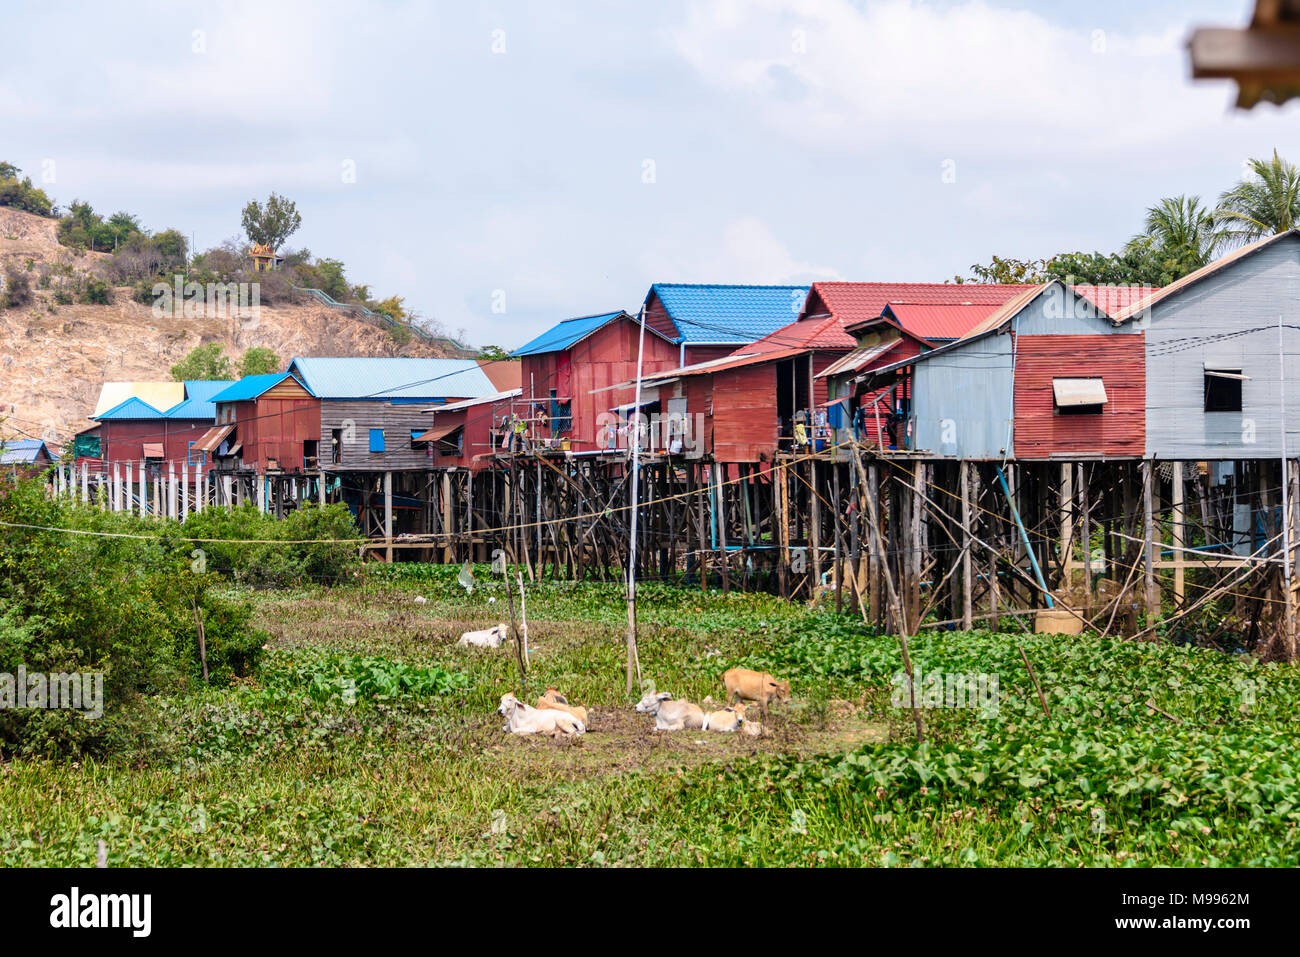 Houses made from corrugated iron on wooden stilts in a poor, rural village with a dirt track road in Cambodia. Stock Photo